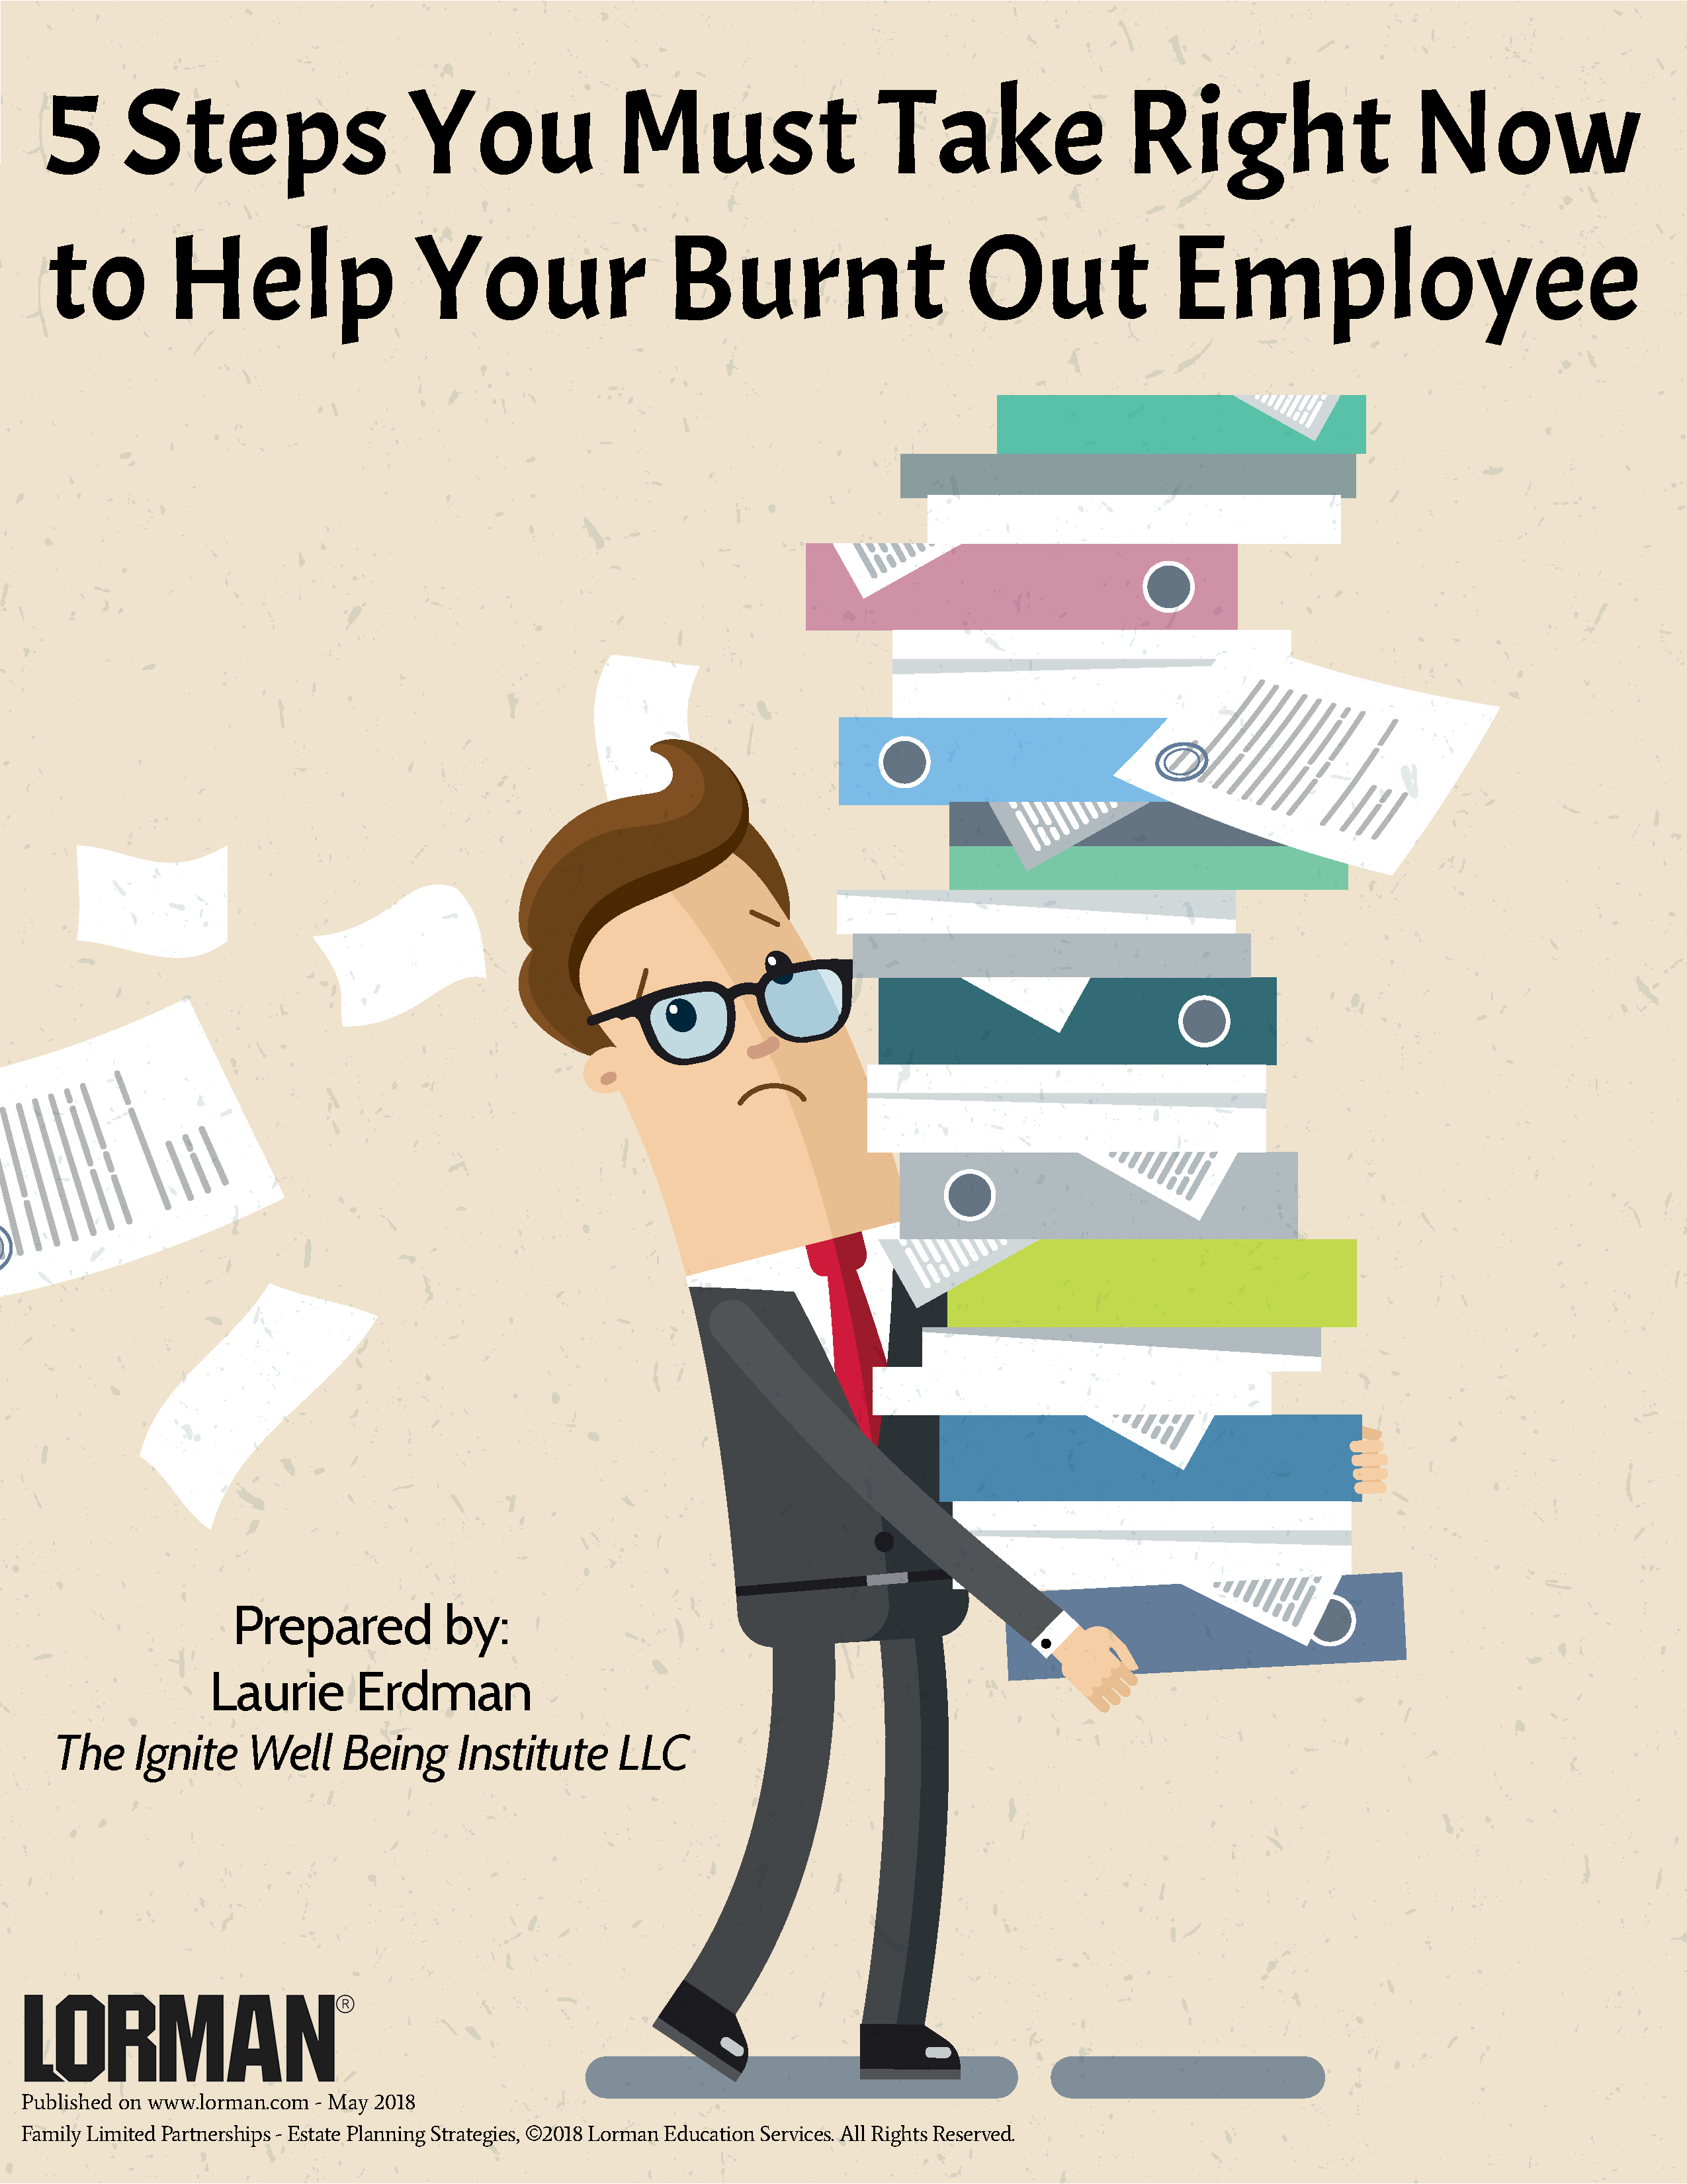 5 Steps You Must Take Right Now to Help Your Burnt Out Employee